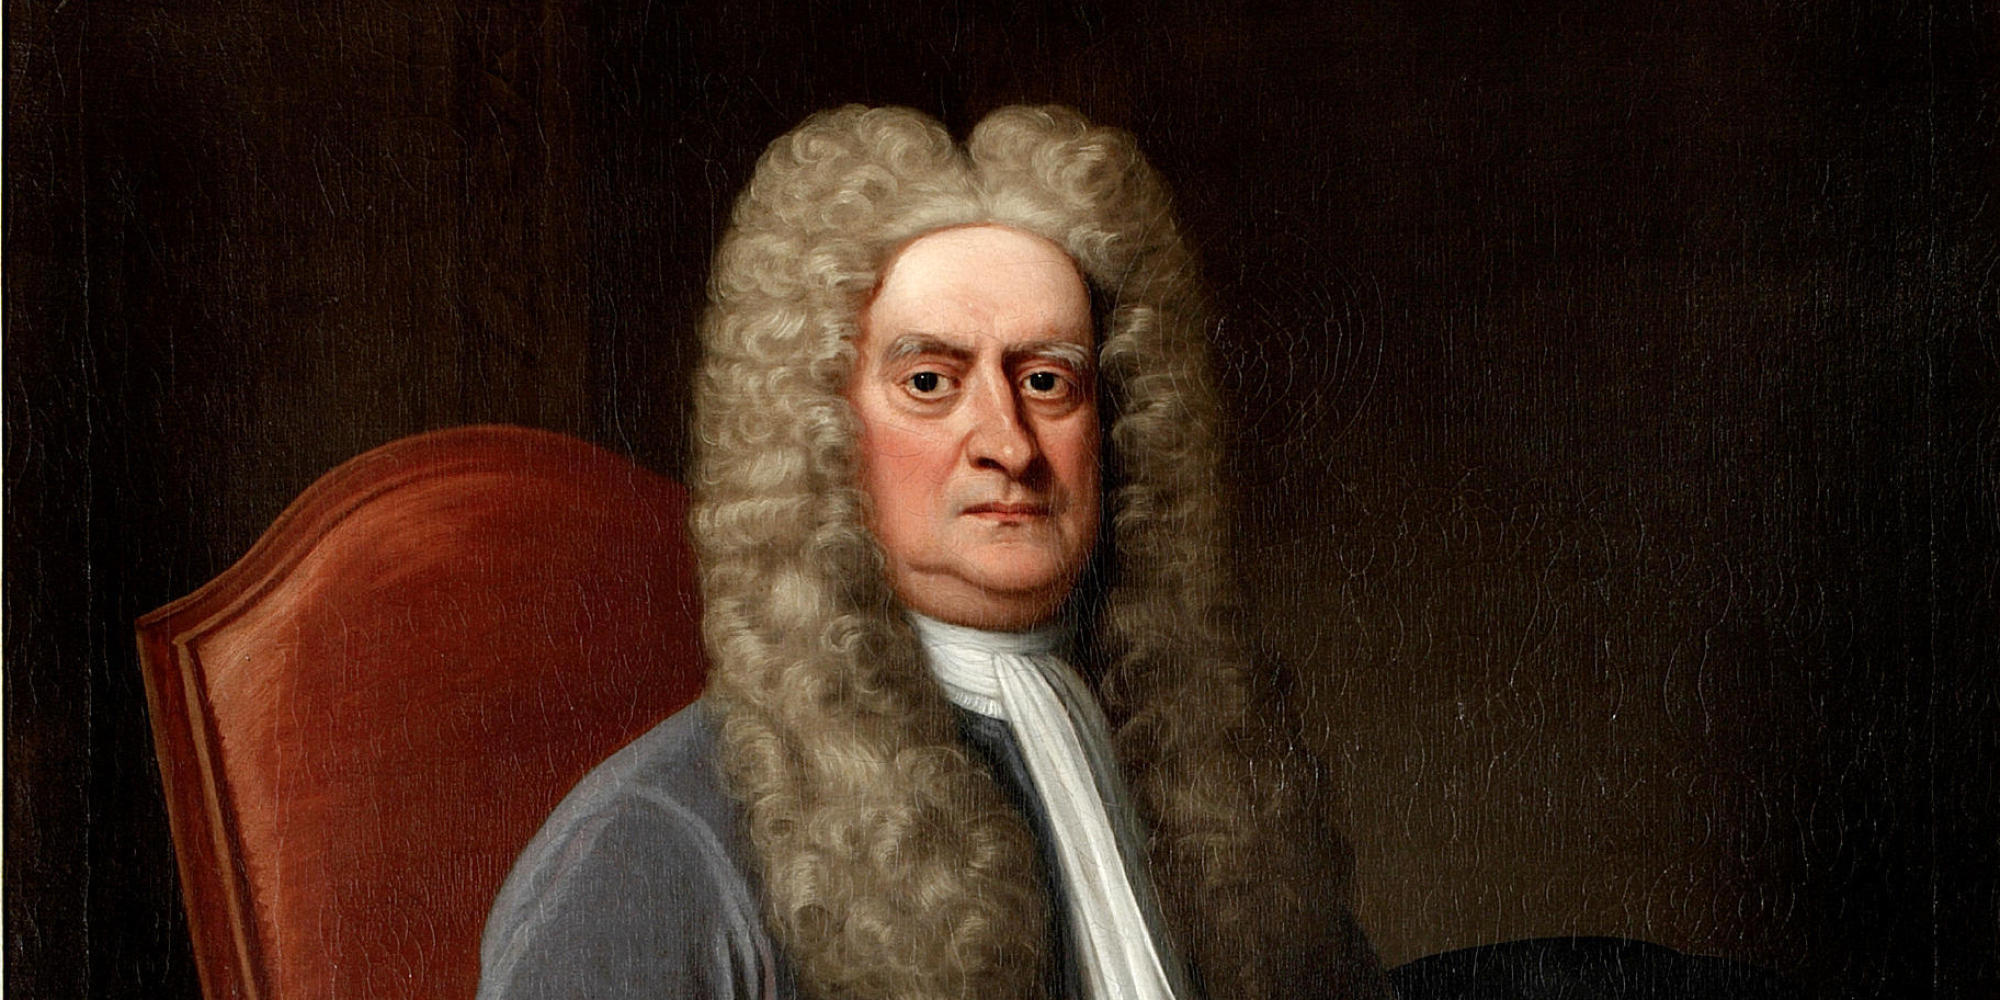 How many kids did Sir Isaac Newton have?